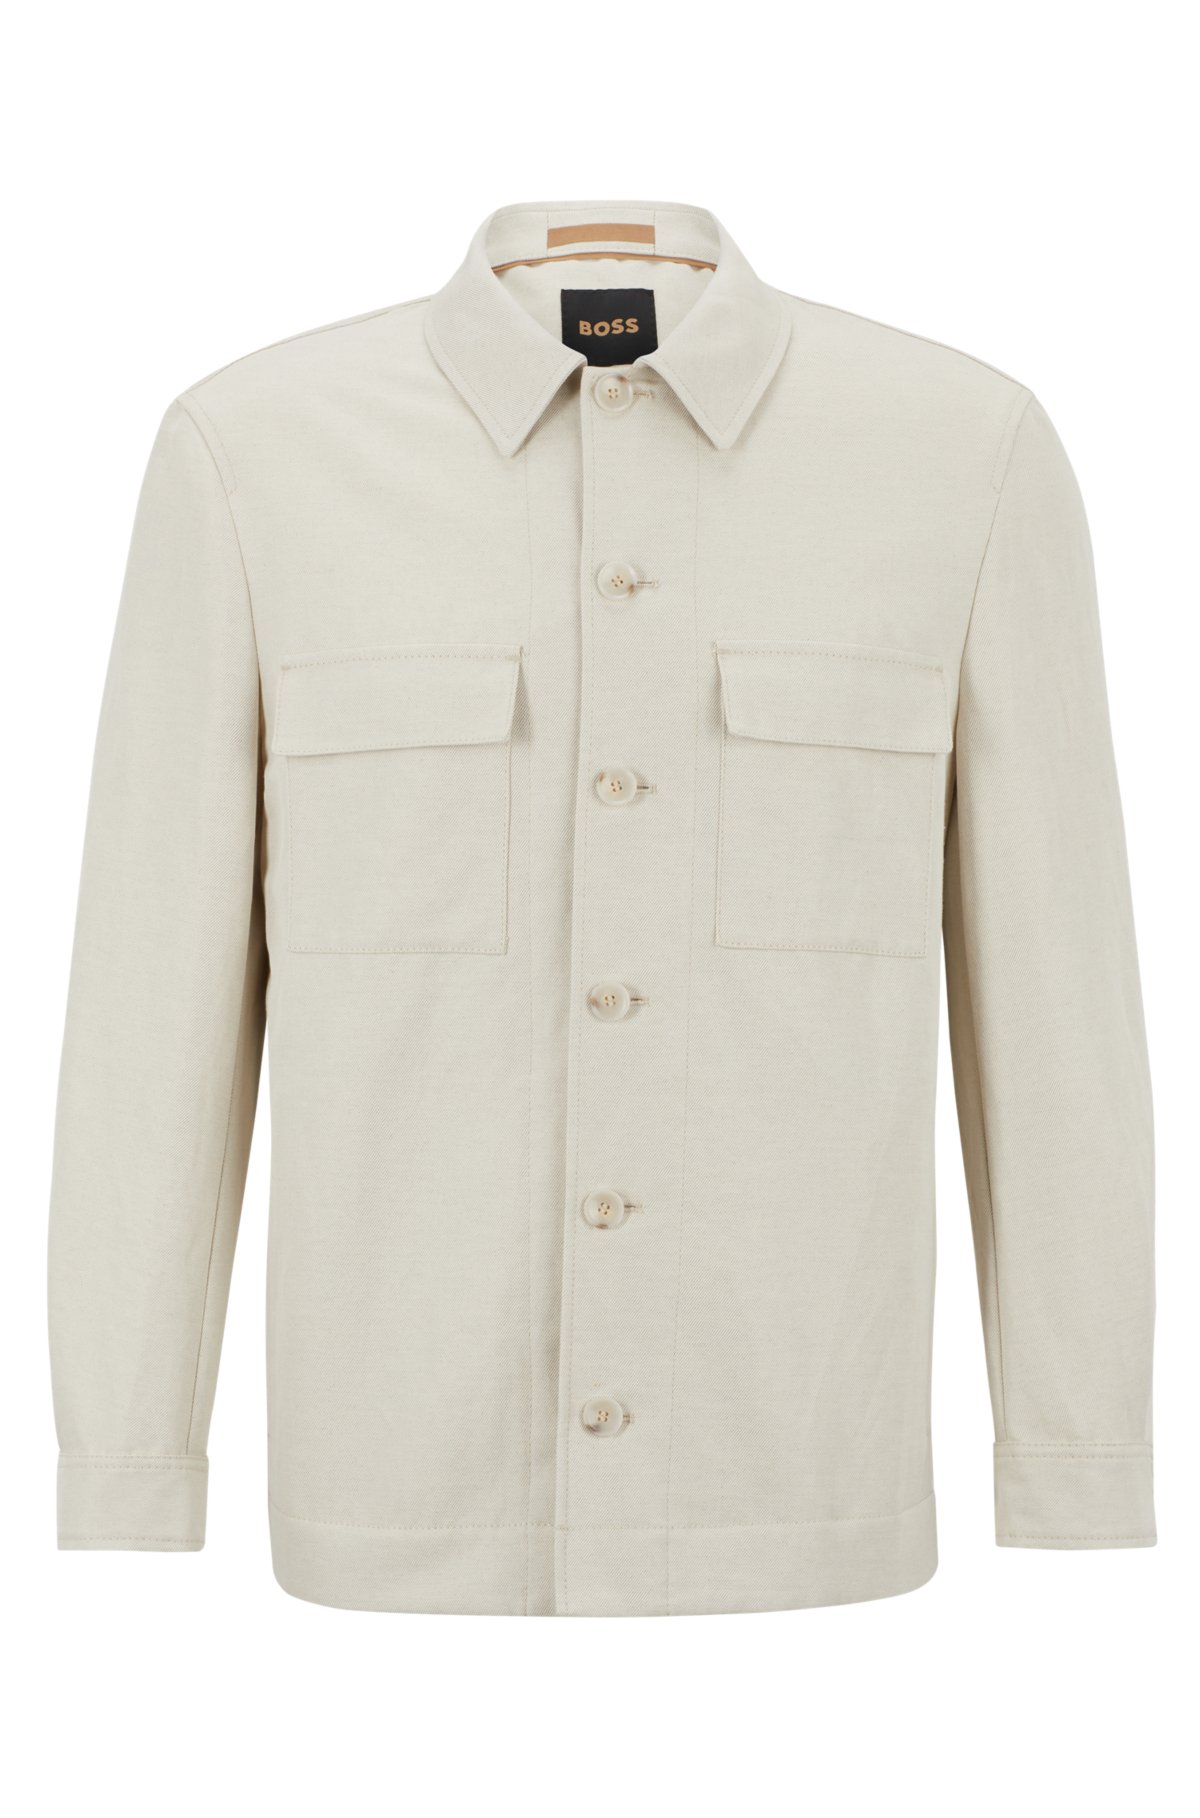 BOSS - Relaxed-fit jacket in cotton and linen